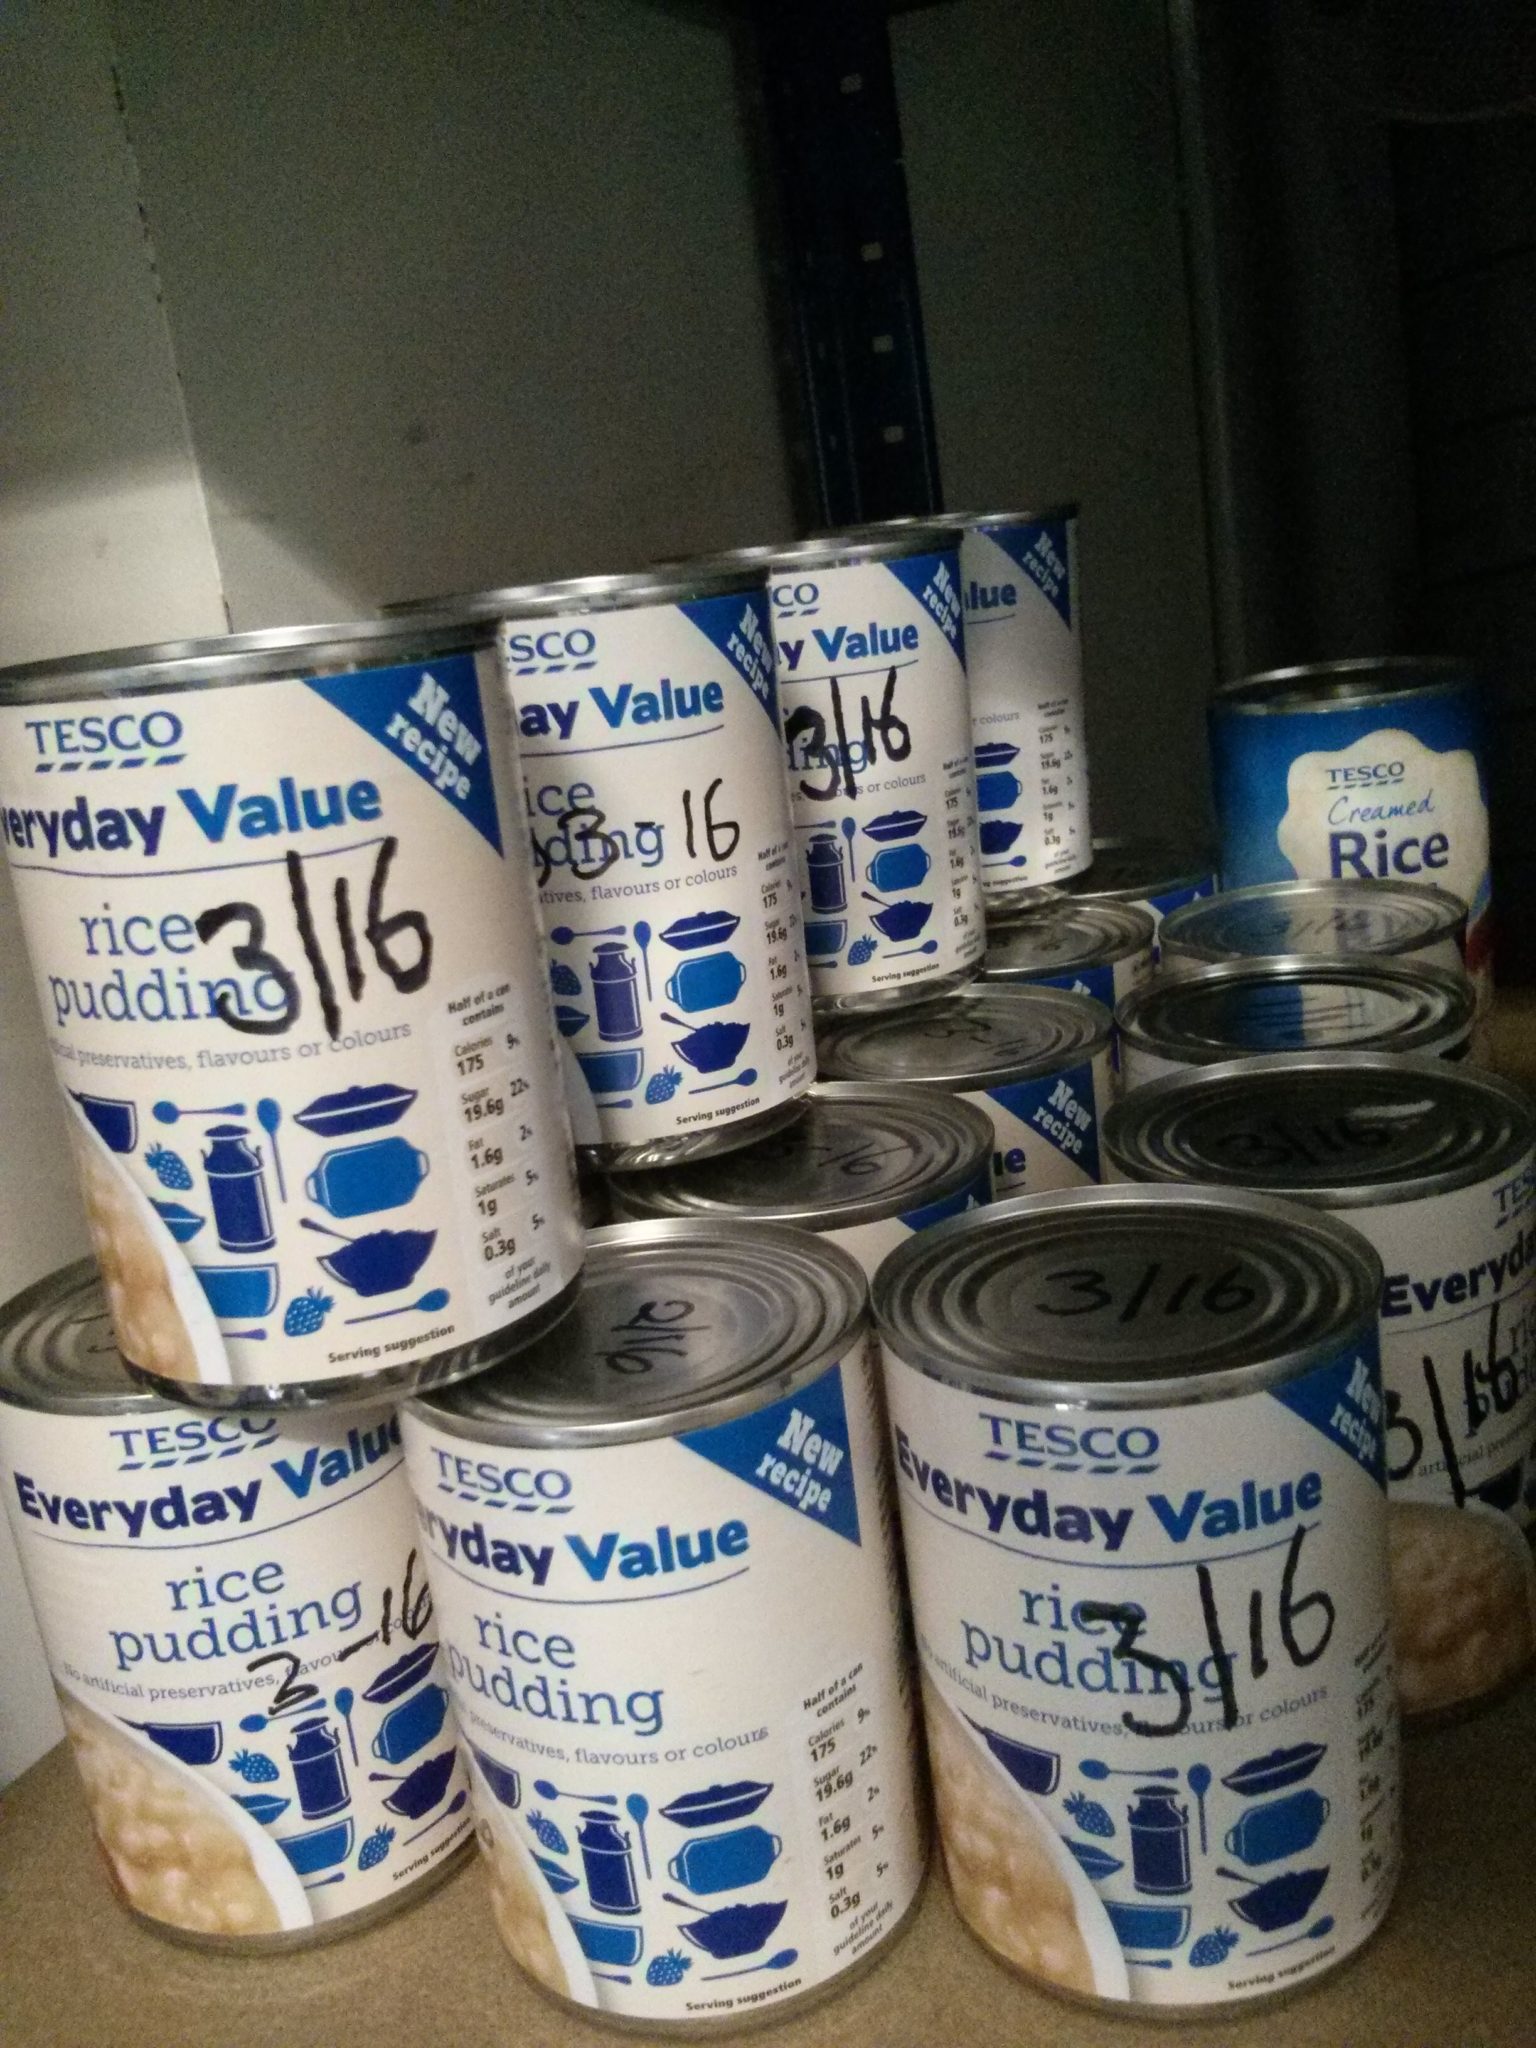 These tins of rice pudding will soon be ate by people in Cwmbran who are struggling